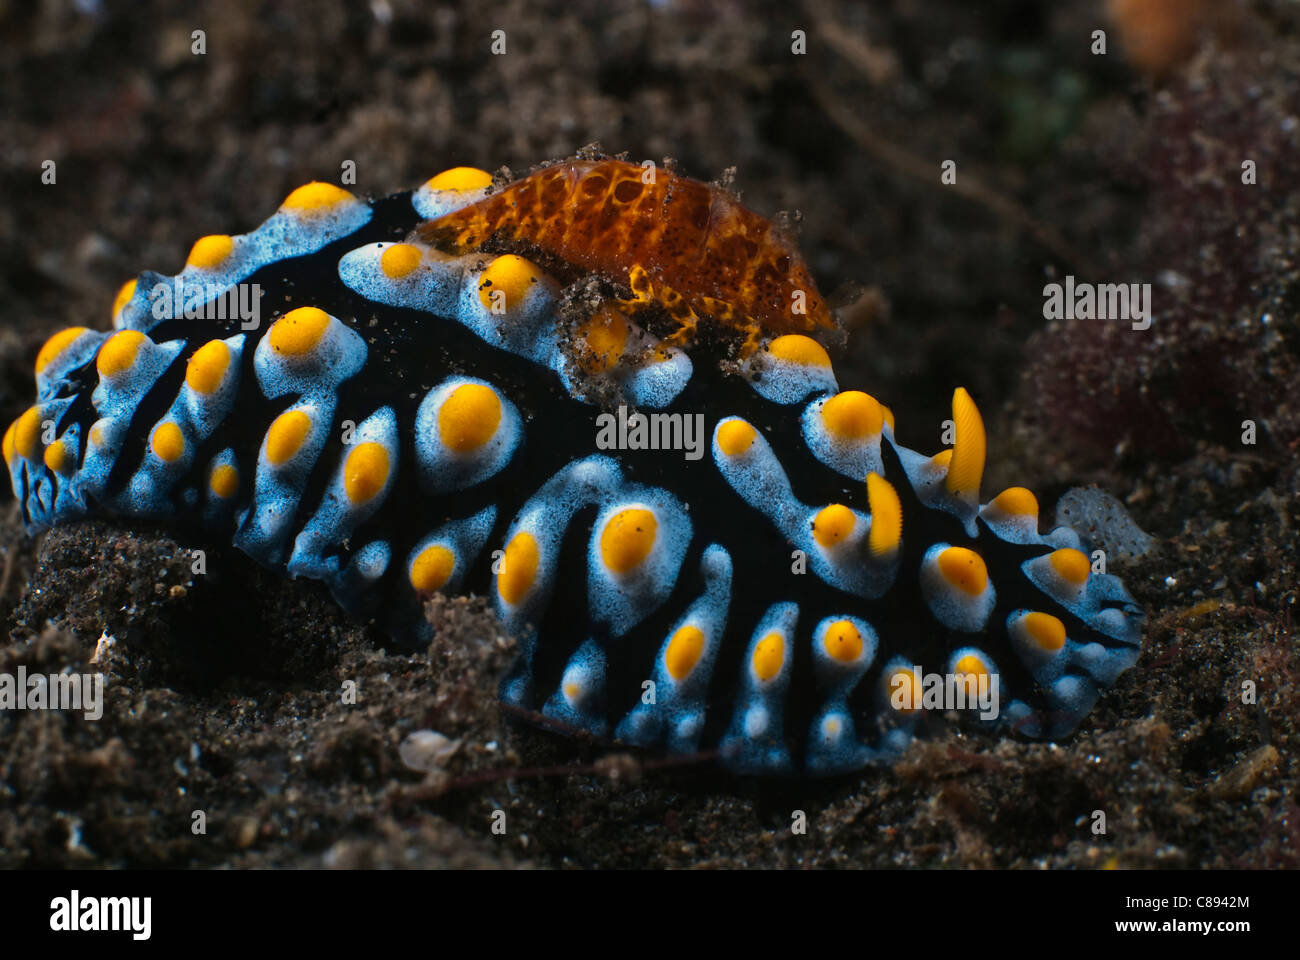 Shrimp on a black Phyllidia nudibranch with blue ridges with yellow warts under water. Stock Photo